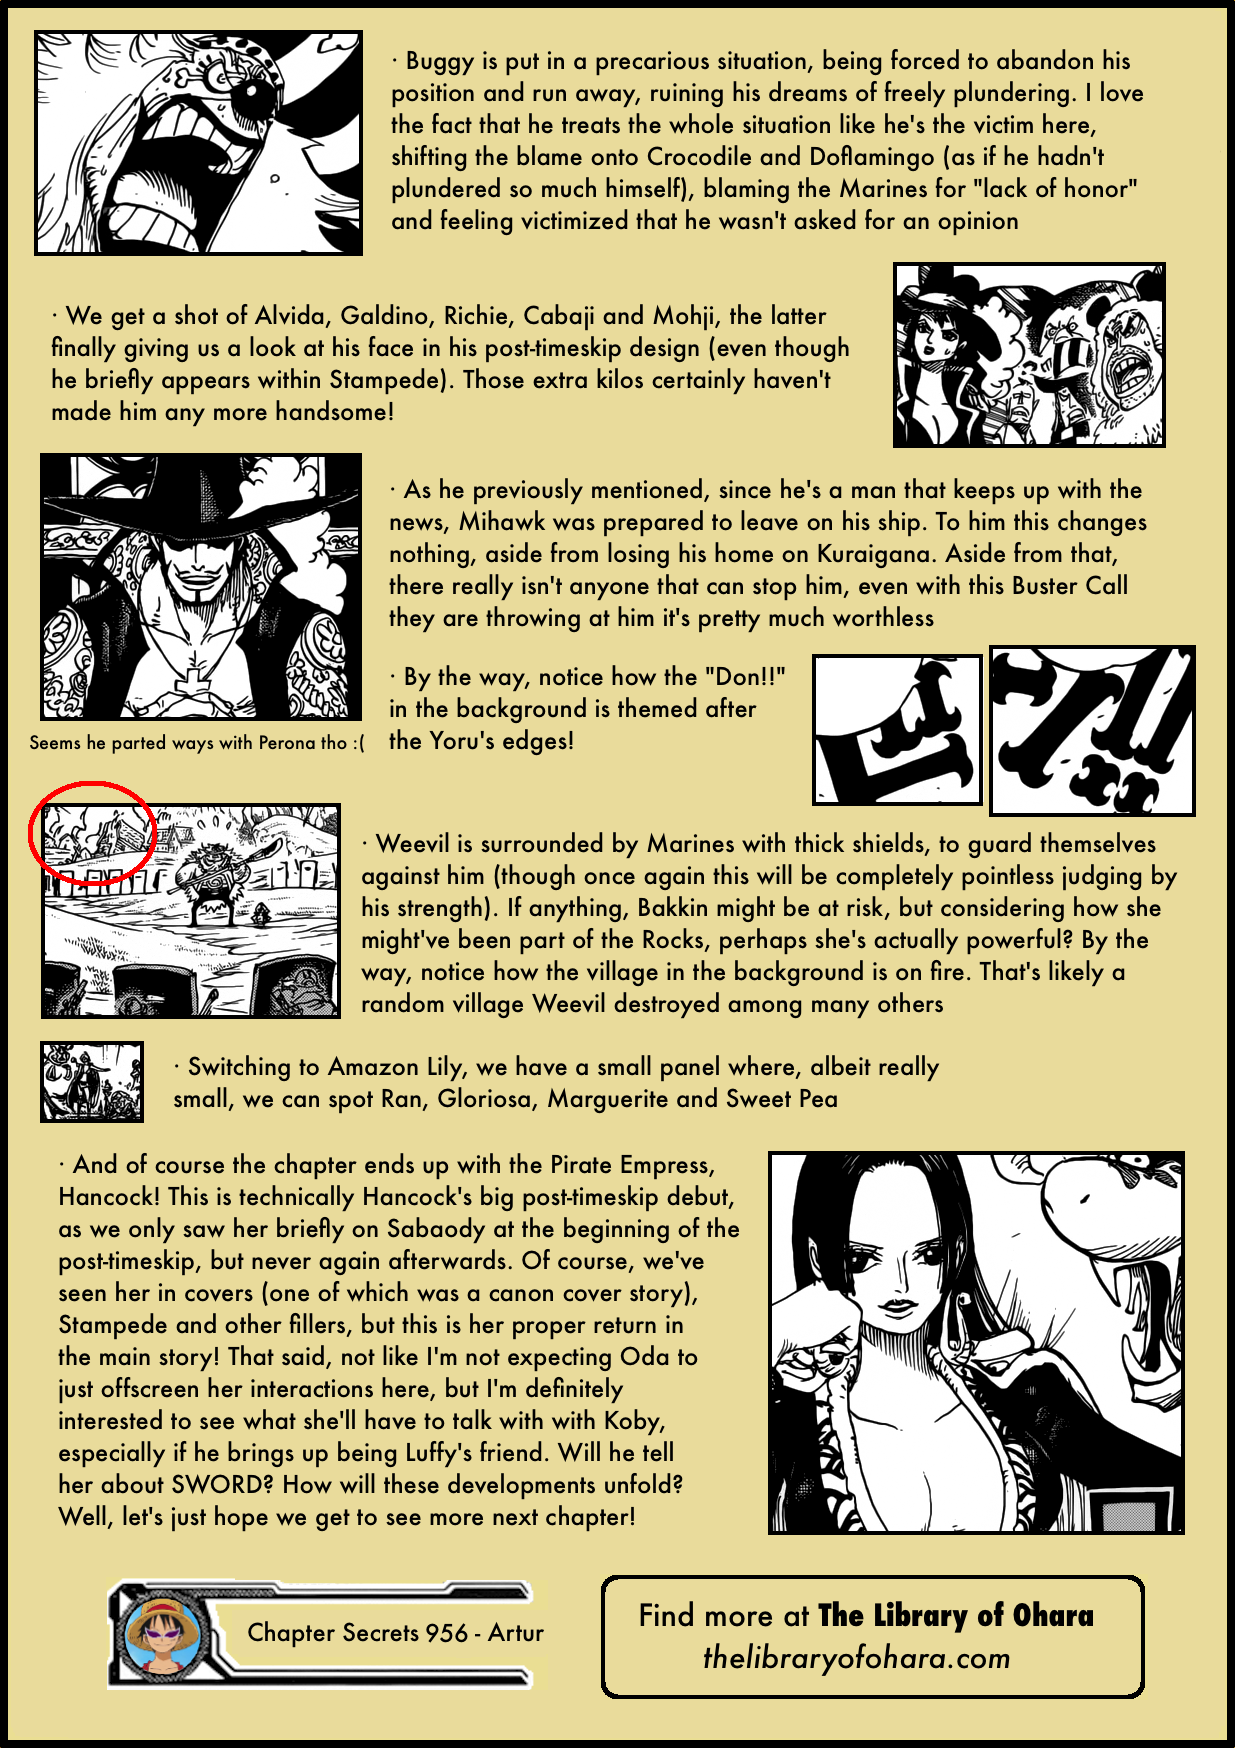 The entire plan is finally revealed - [One Piece Chapter 1058] Theory : r/ OnePiece